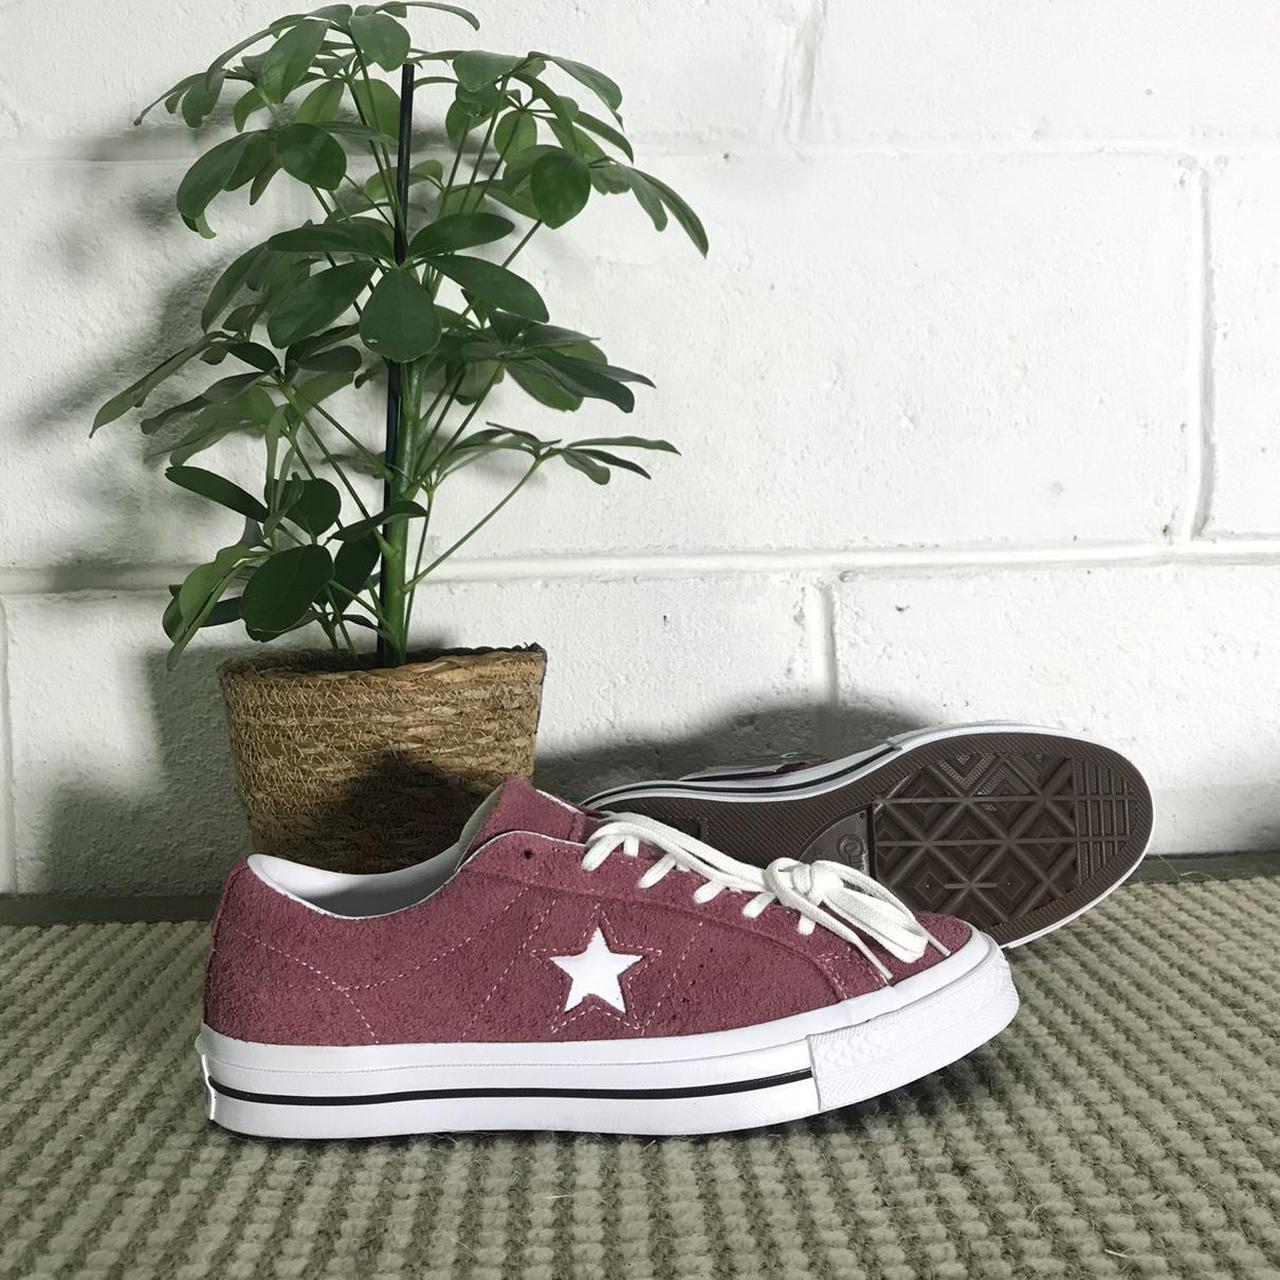 Converse Women's White and Burgundy Trainers | Depop